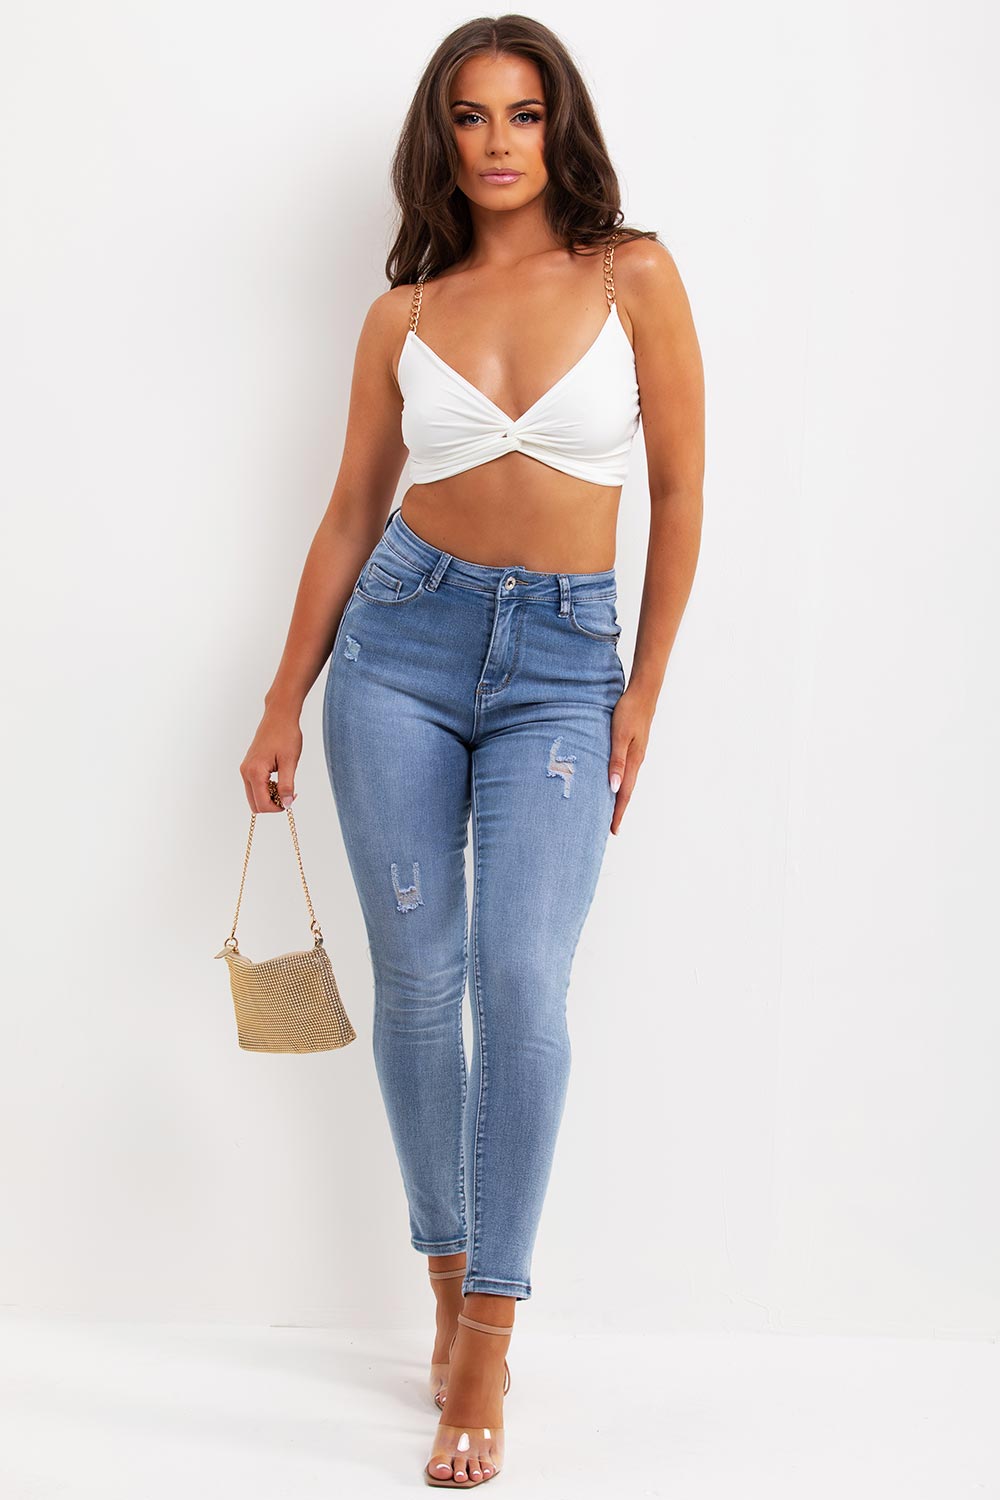 crop top with gold chain straps and knot front